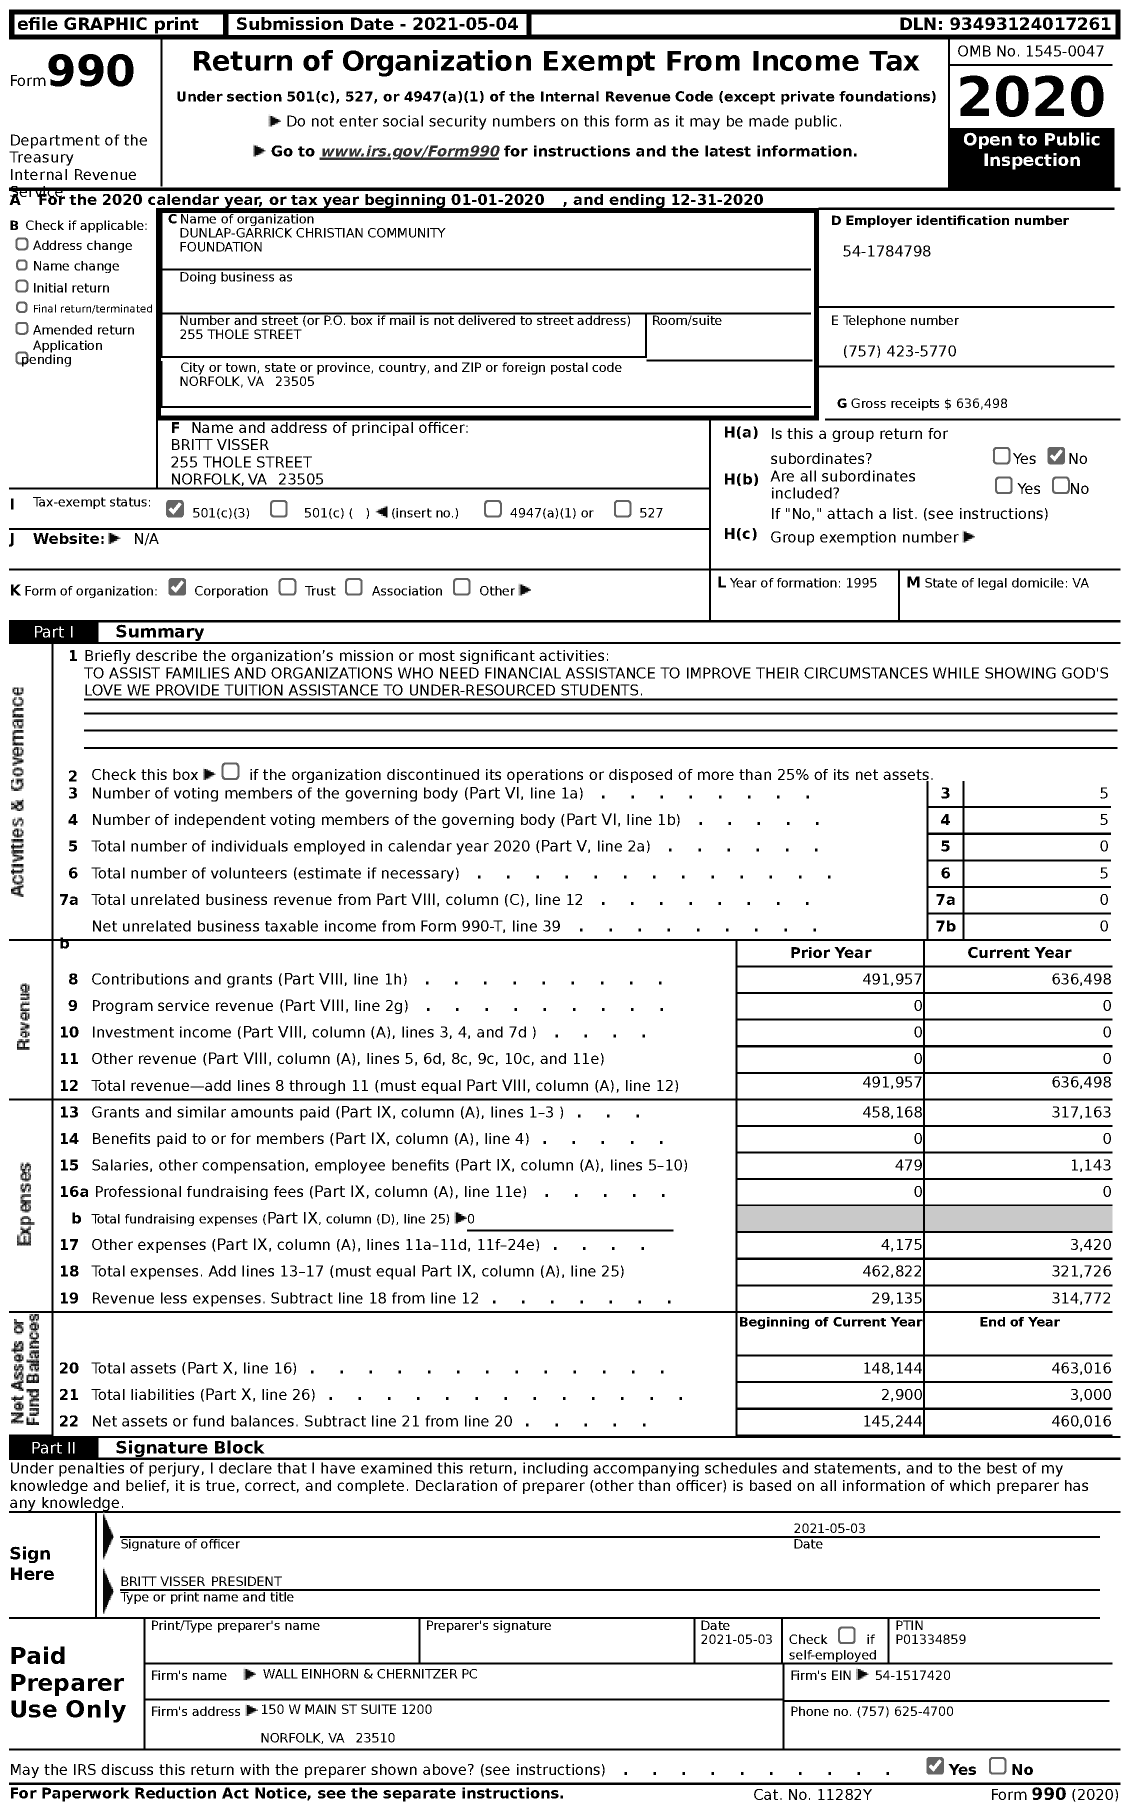 Image of first page of 2020 Form 990 for Dunlap-Garrick Christian Community Foundation